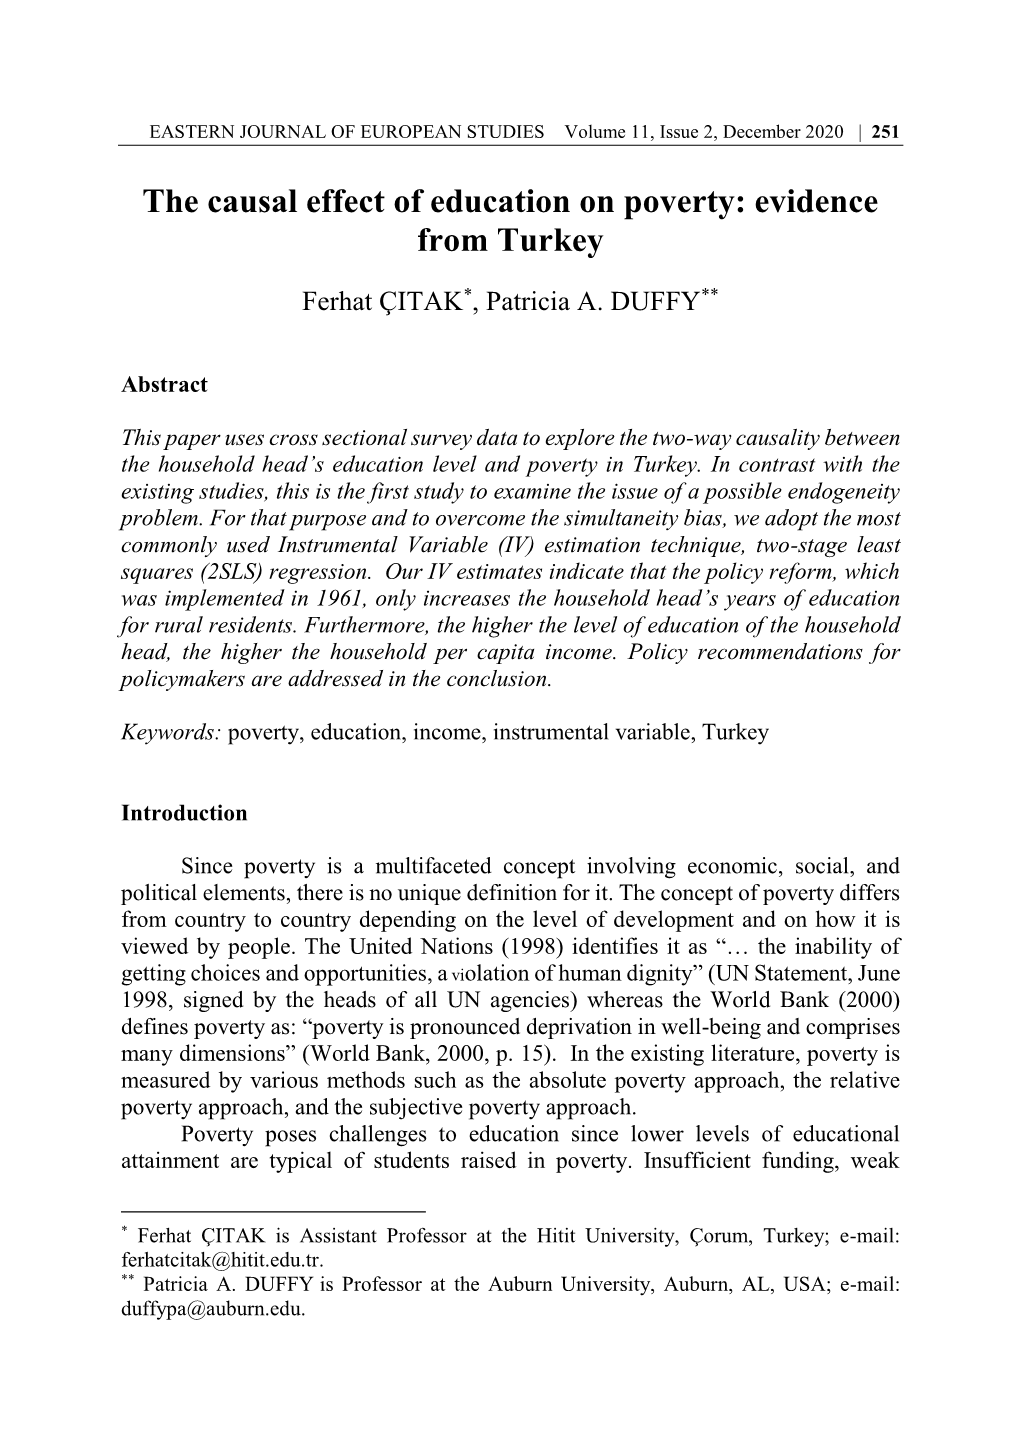 The Causal Effect of Education on Poverty: Evidence from Turkey